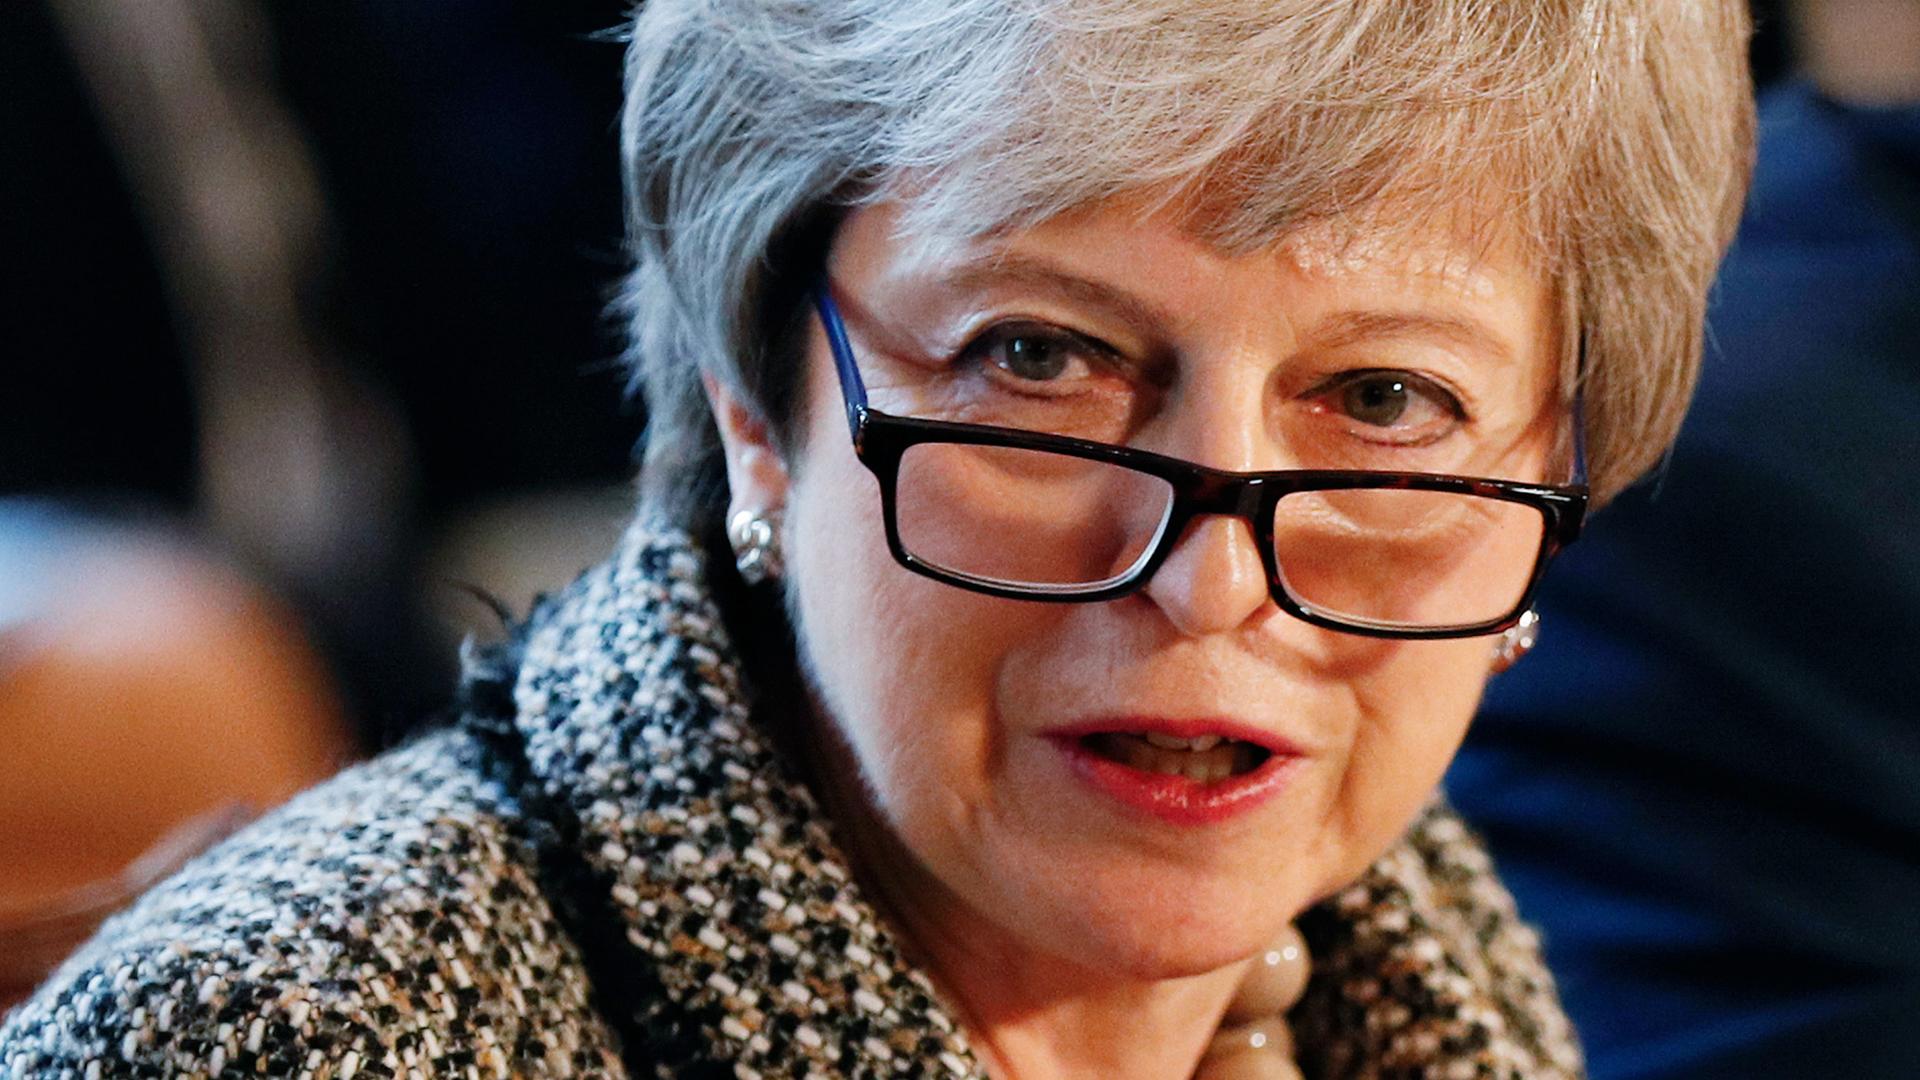 A close-up photograph of Britain's Prime Minister Theresa May who is wearing dark-rimmed glasses.